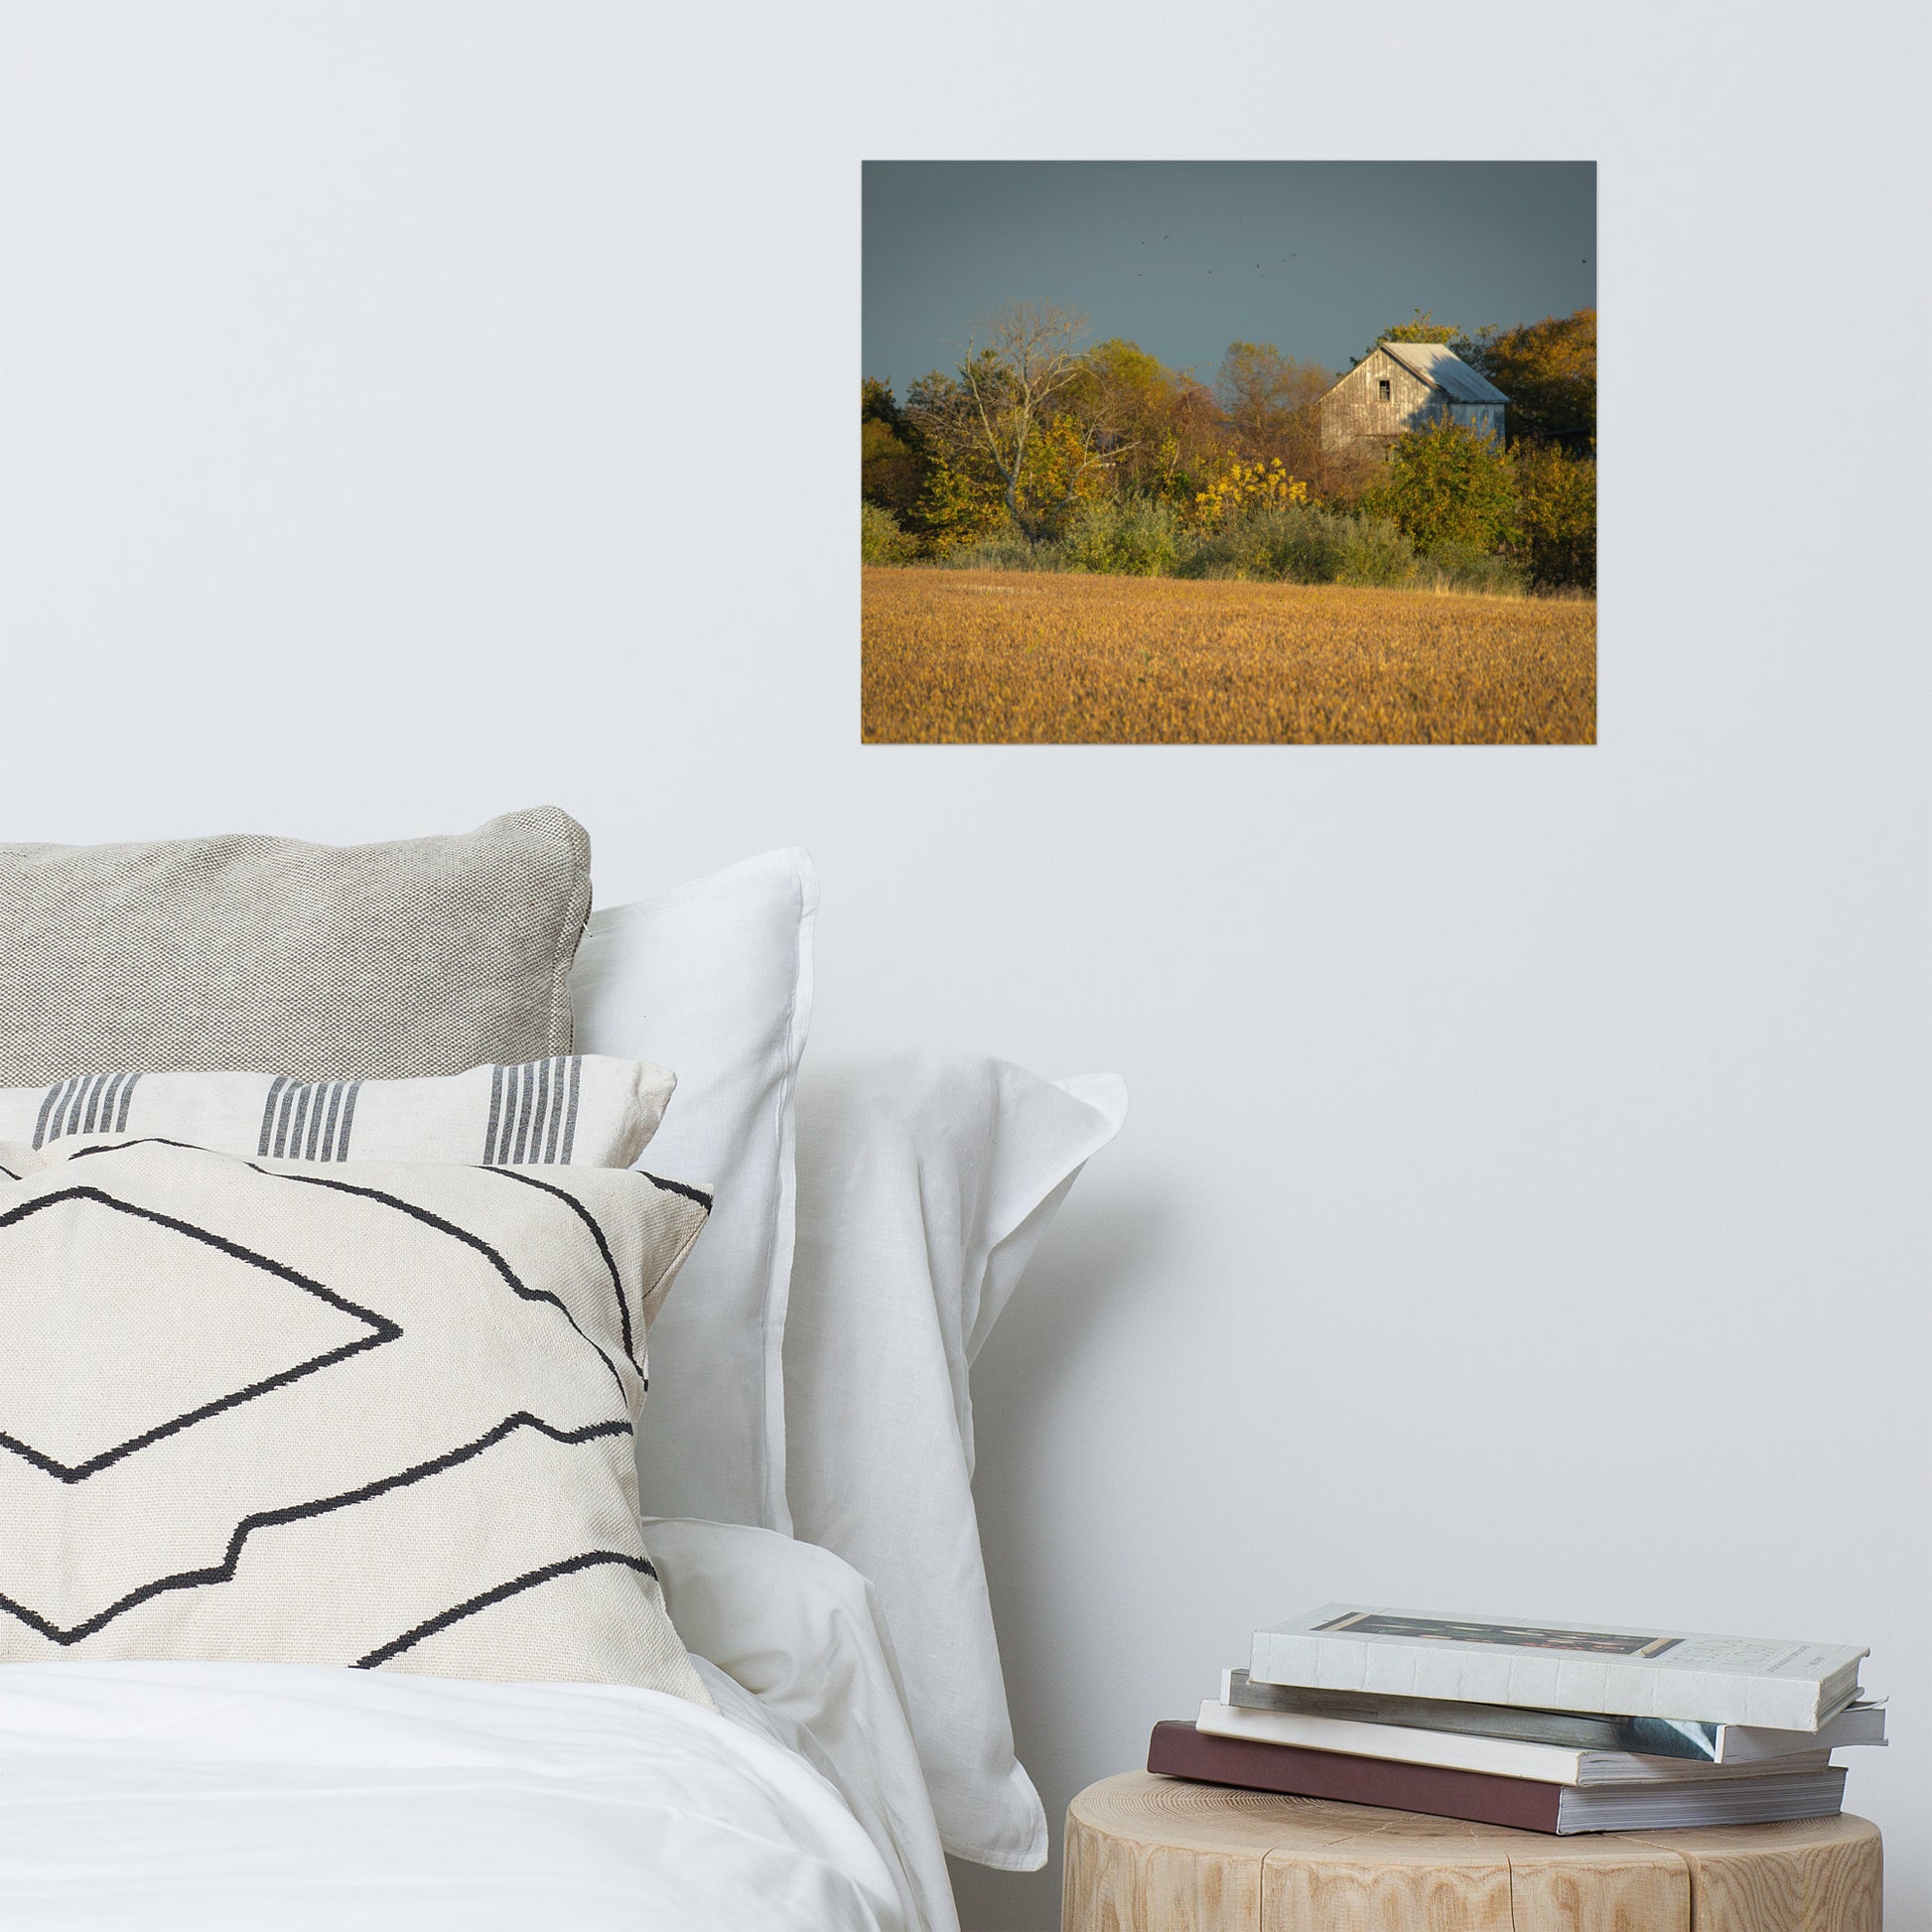 Country Style Wall Decor: Abandoned Barn In The Trees Landscape Photo Loose Wall Art Prints